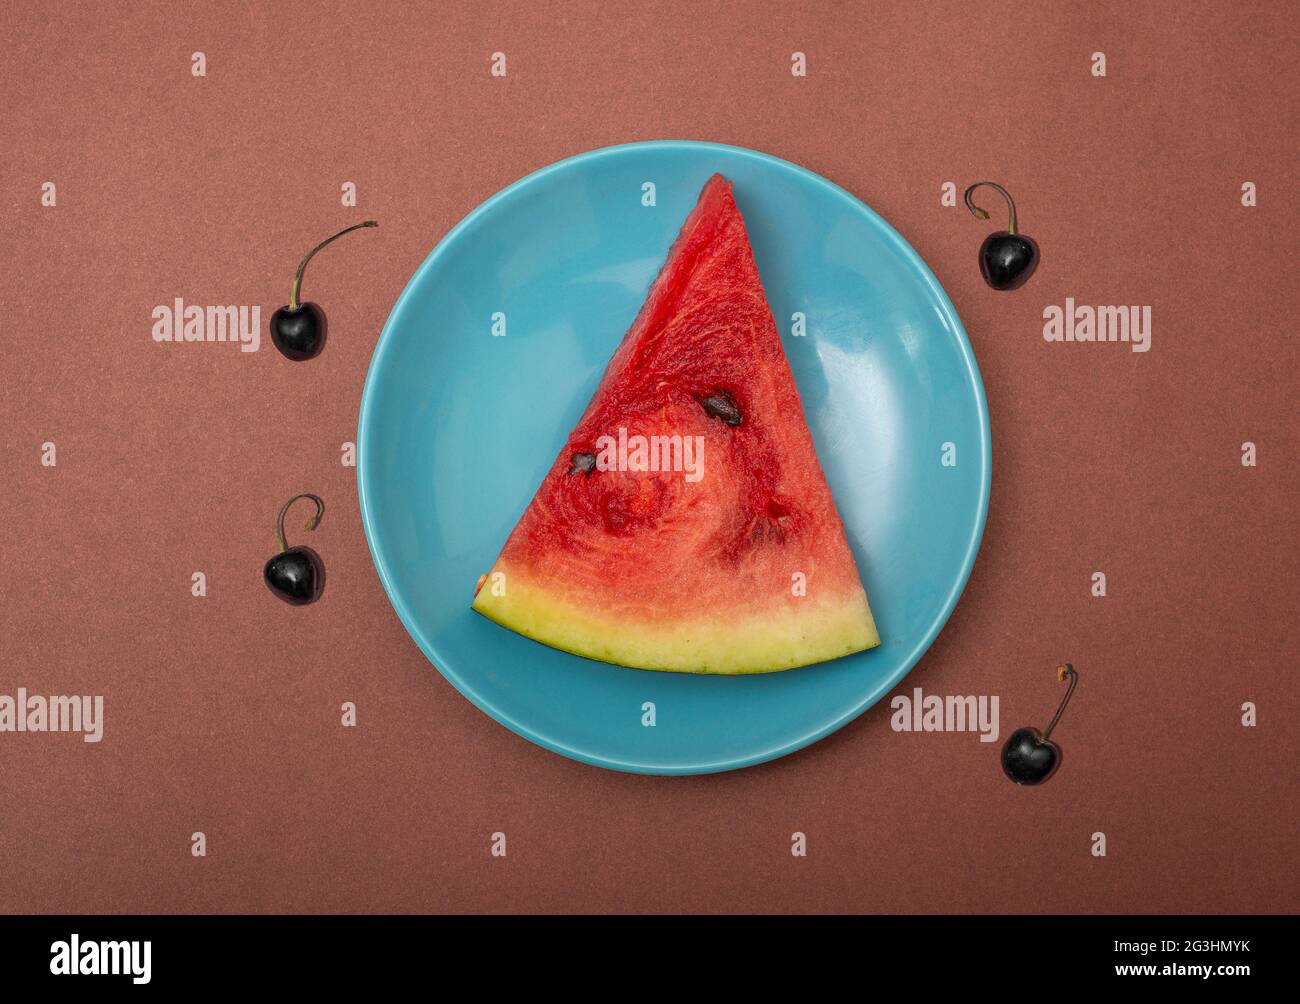 Watermelon peice in blue plate summer time concept. Stock Photo